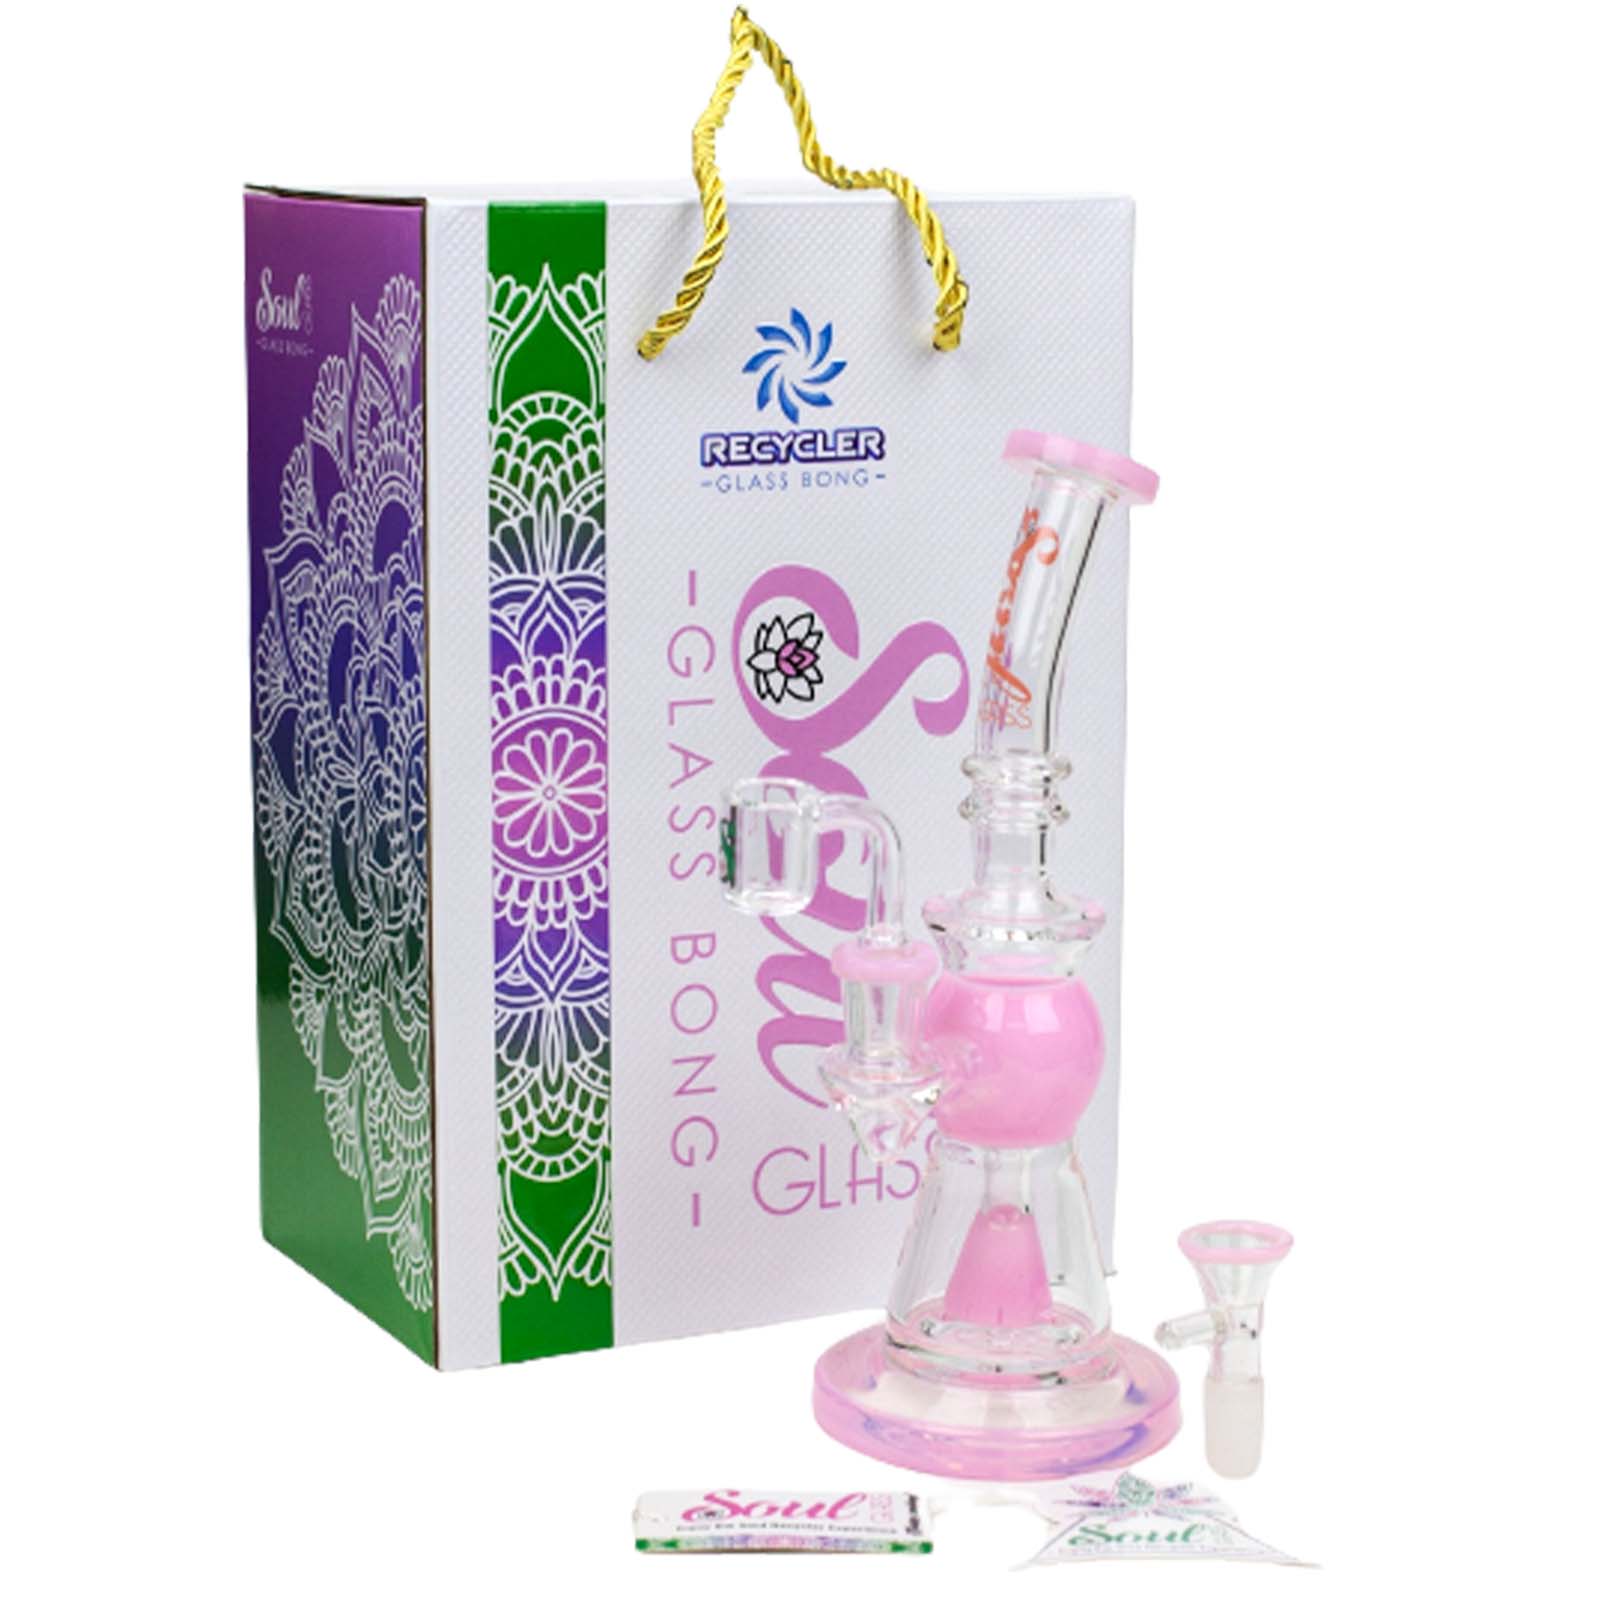 8.2" SOUL Glass 2-in-1 Cone Diffuser Bong